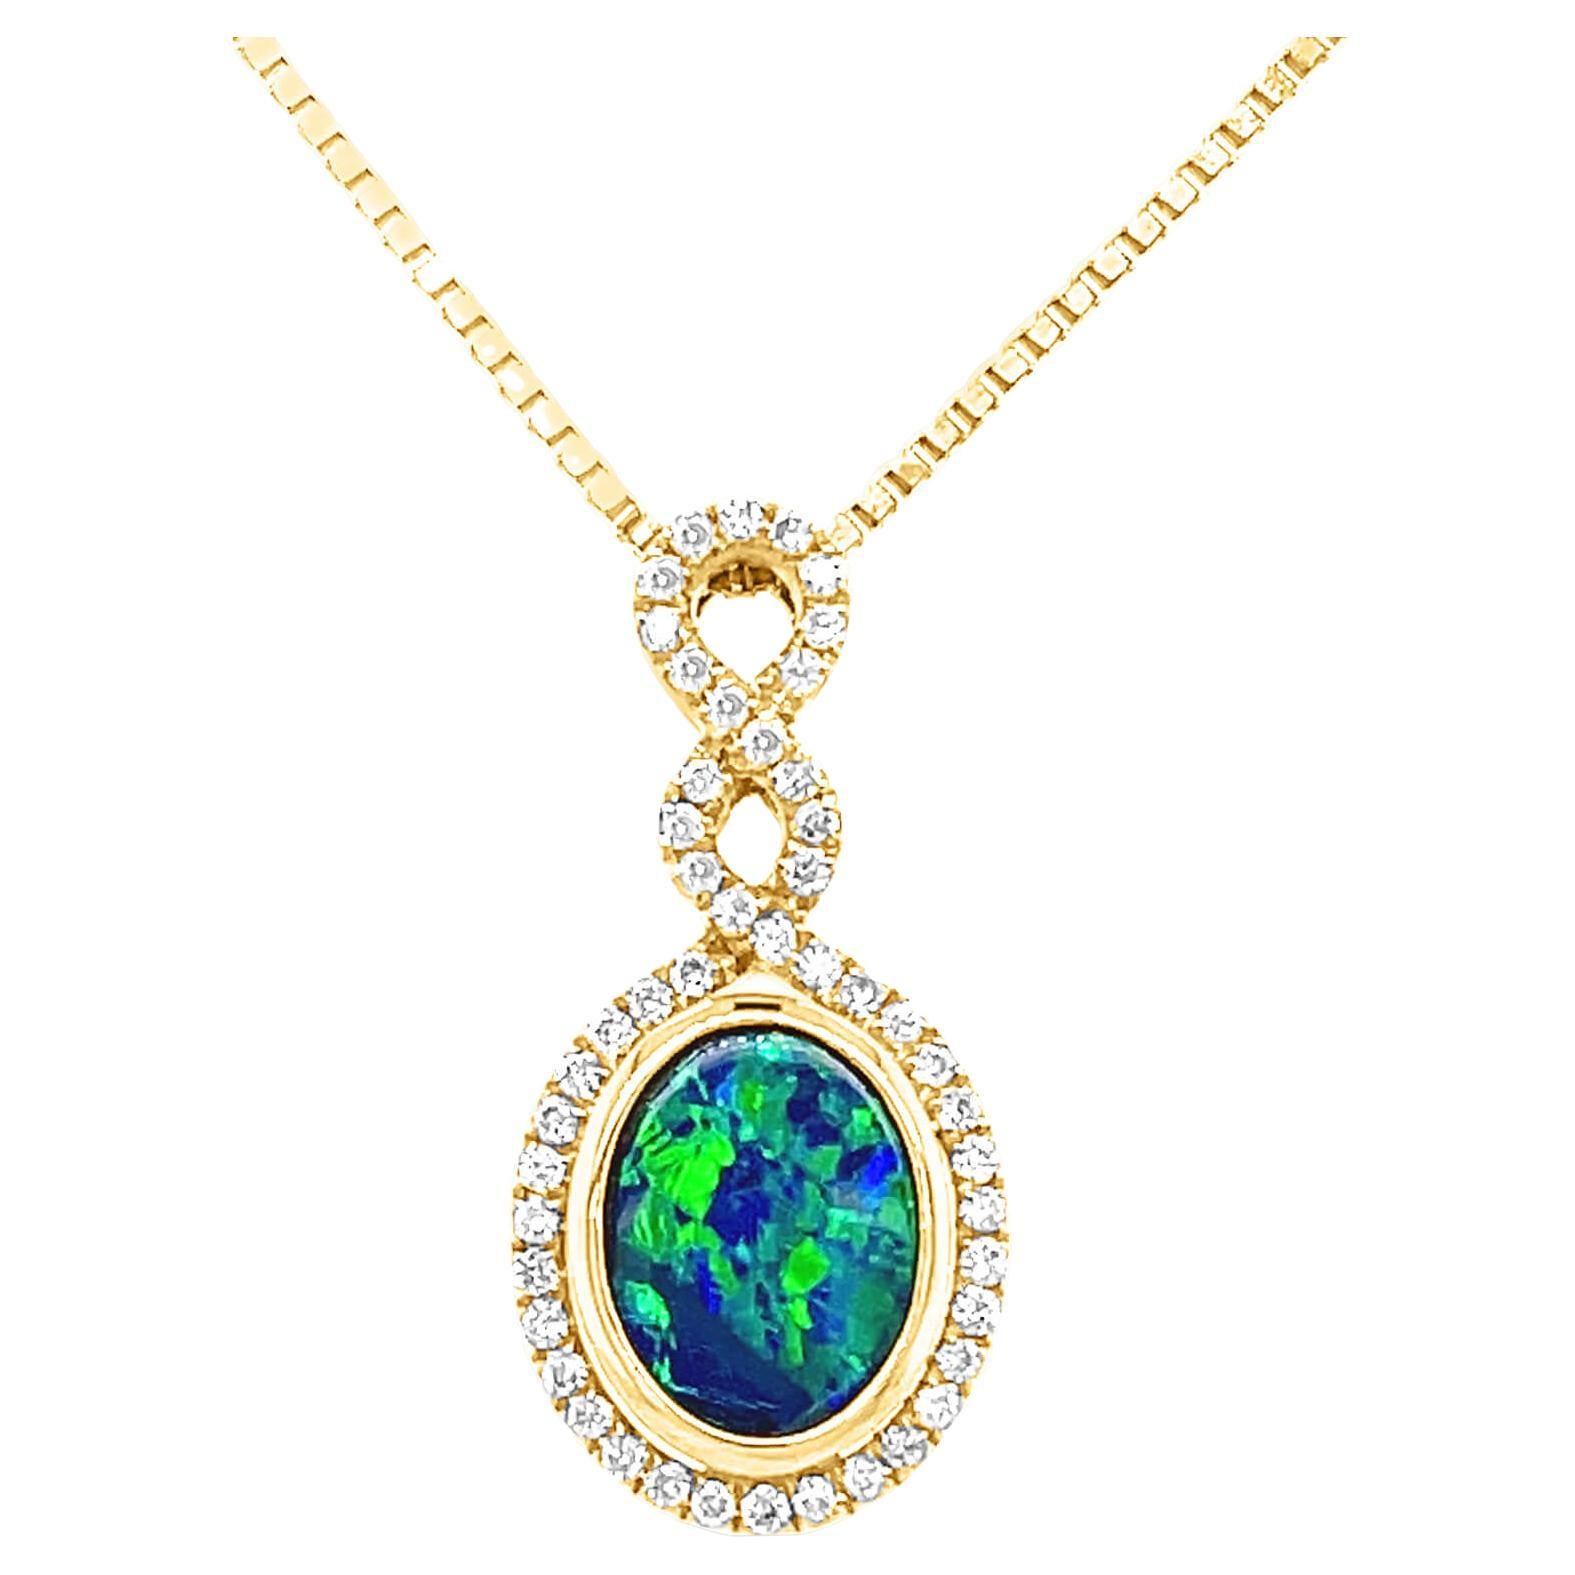 Australian 0.65ct Opal Doublet Pendant Necklace in 18k Yellow Gold with Diamonds For Sale